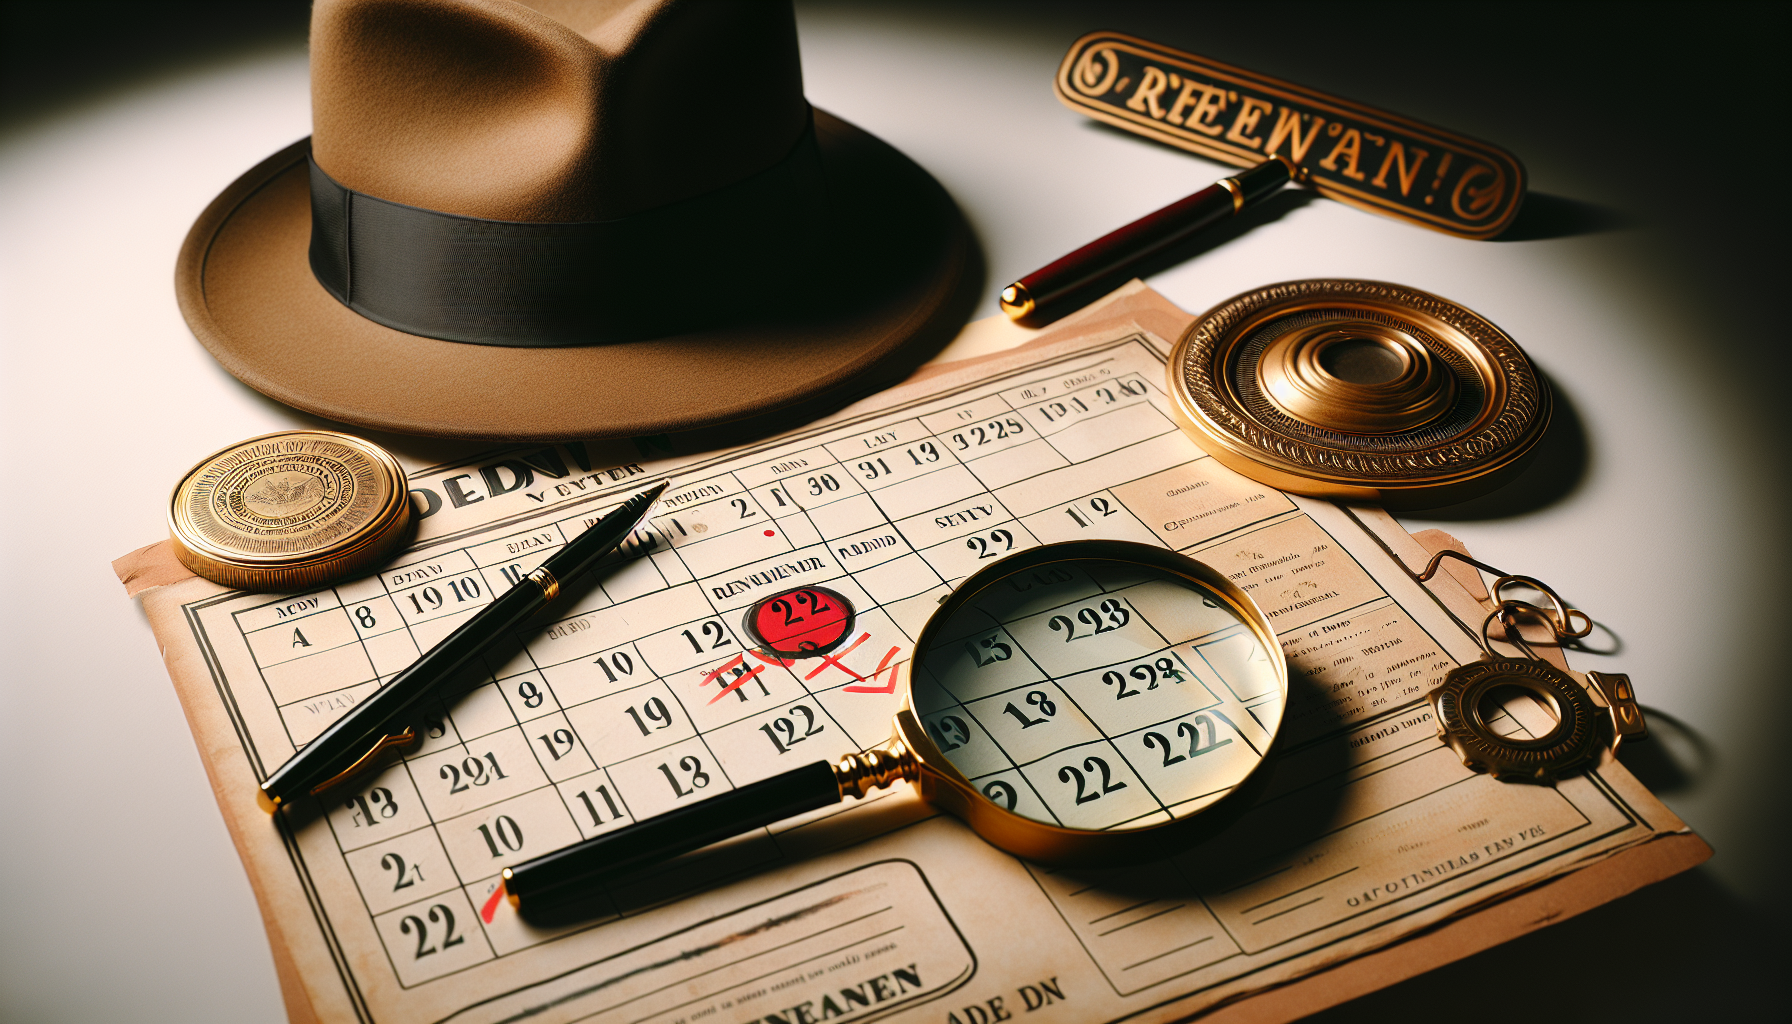 Illustration of a calendar with the renewal date for a private investigator bond highlighted